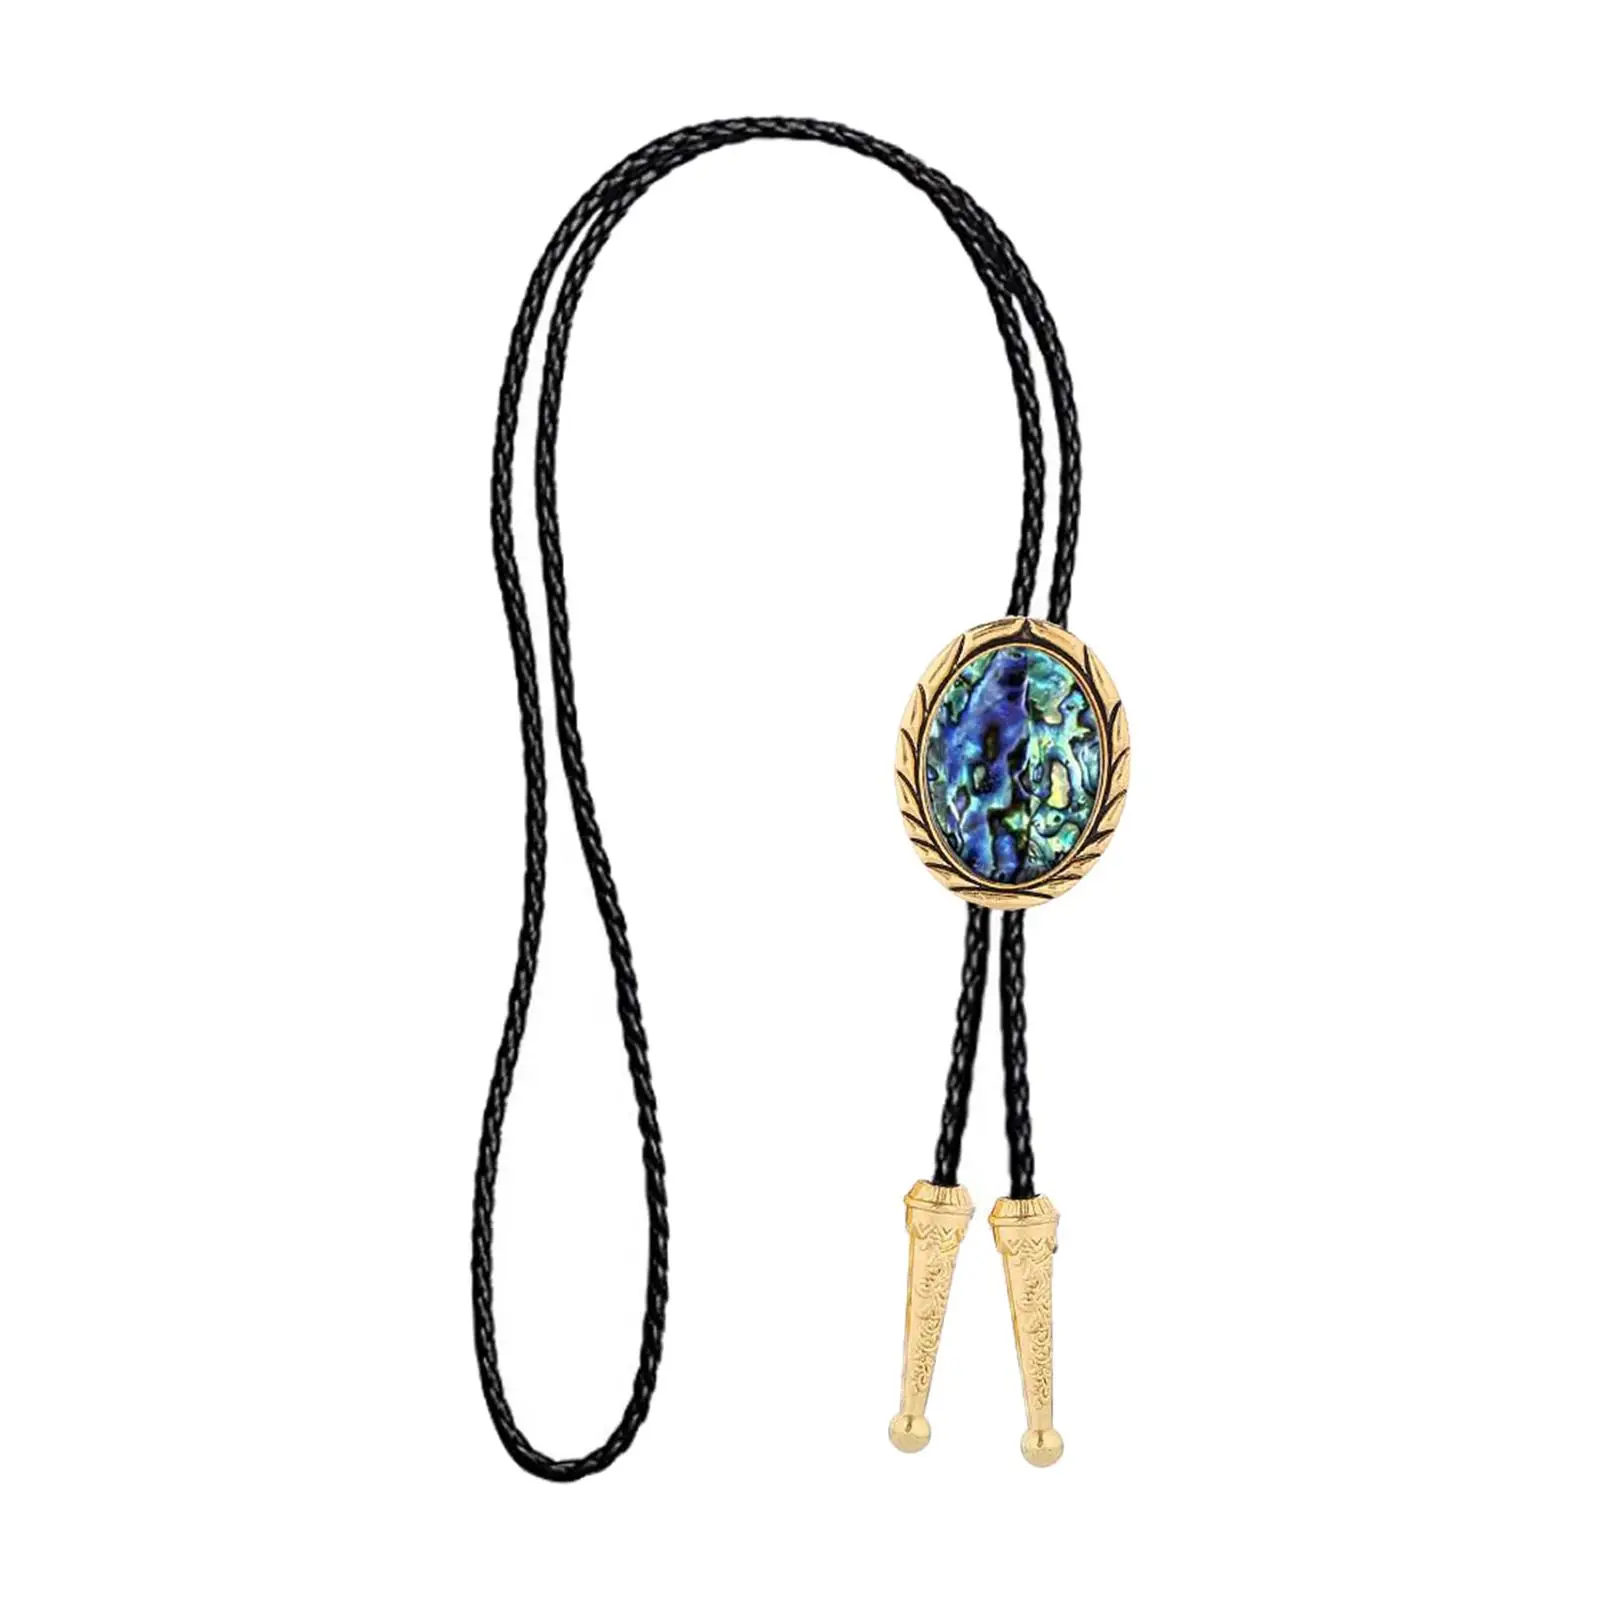 Vintage Bolo Tie Oval Pendant Necklace Tie PU Leather Rope Necktie Costume Jewelry Jewelry for Woman Friends Prom Anniversary